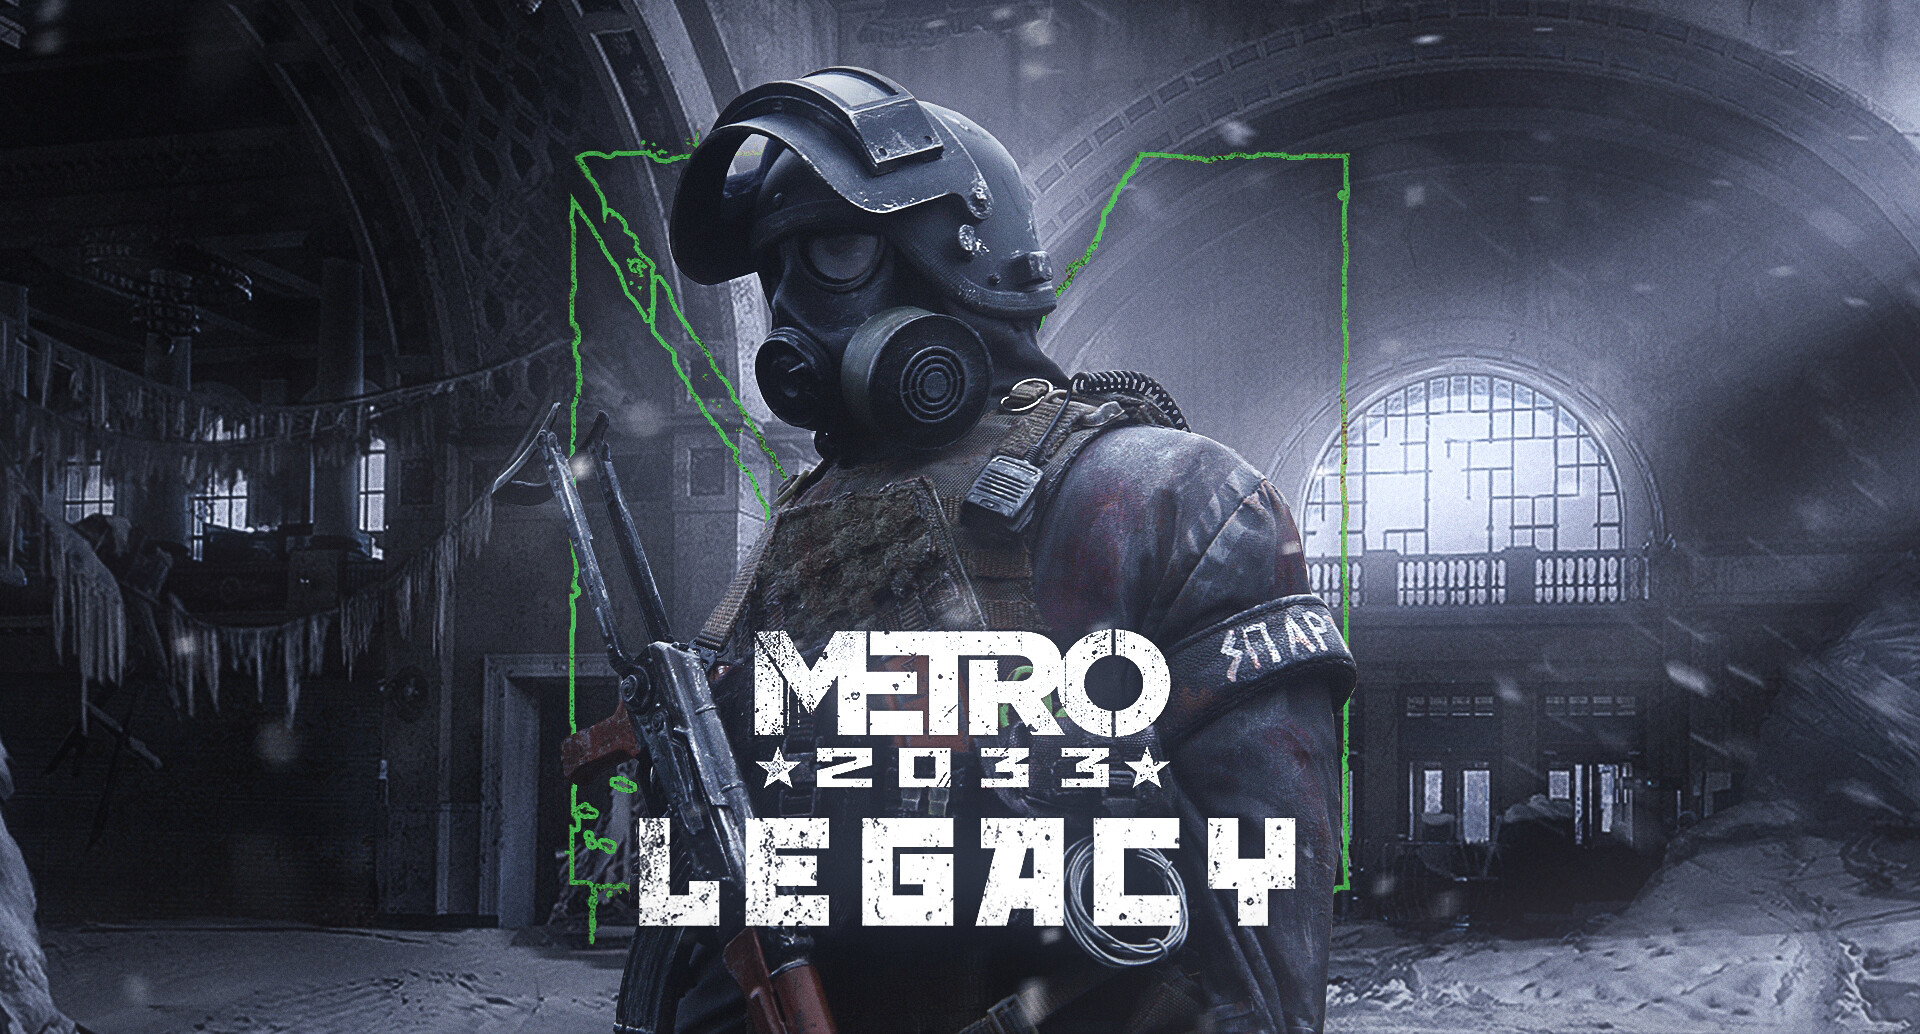 Metro for steam unofficial patch фото 62